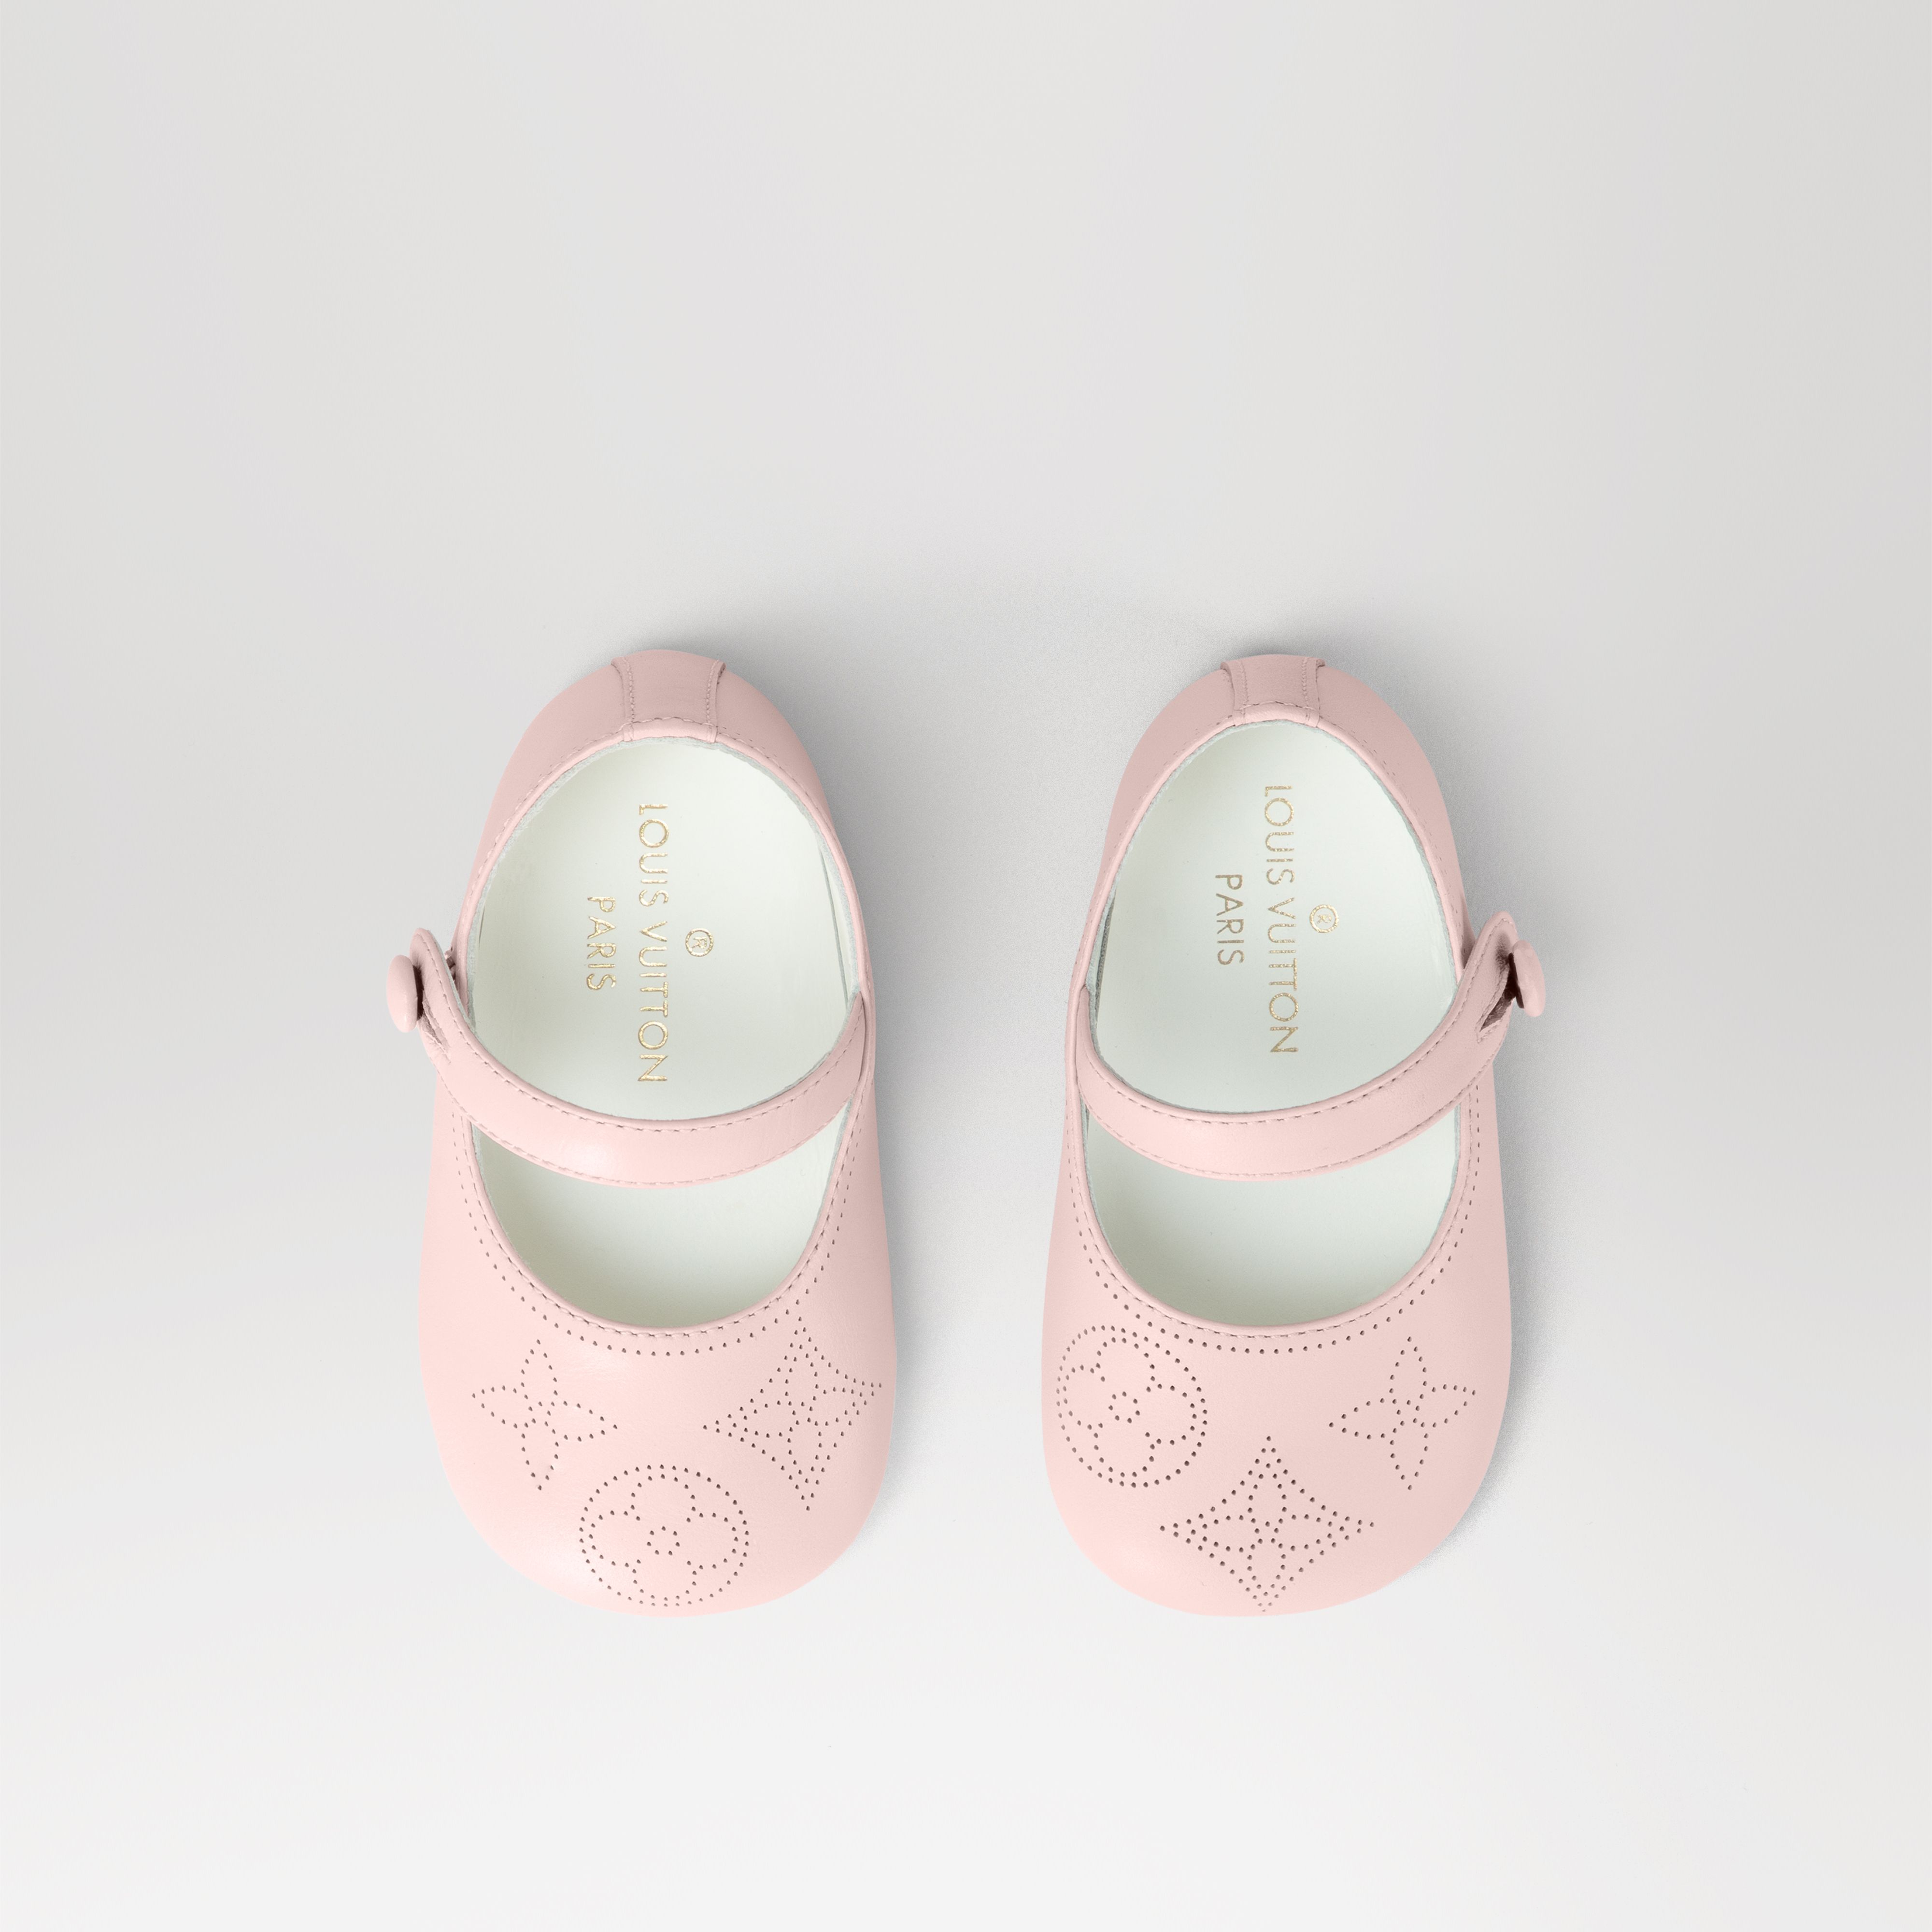 All the details about Louis Vuitton's first collection for babies